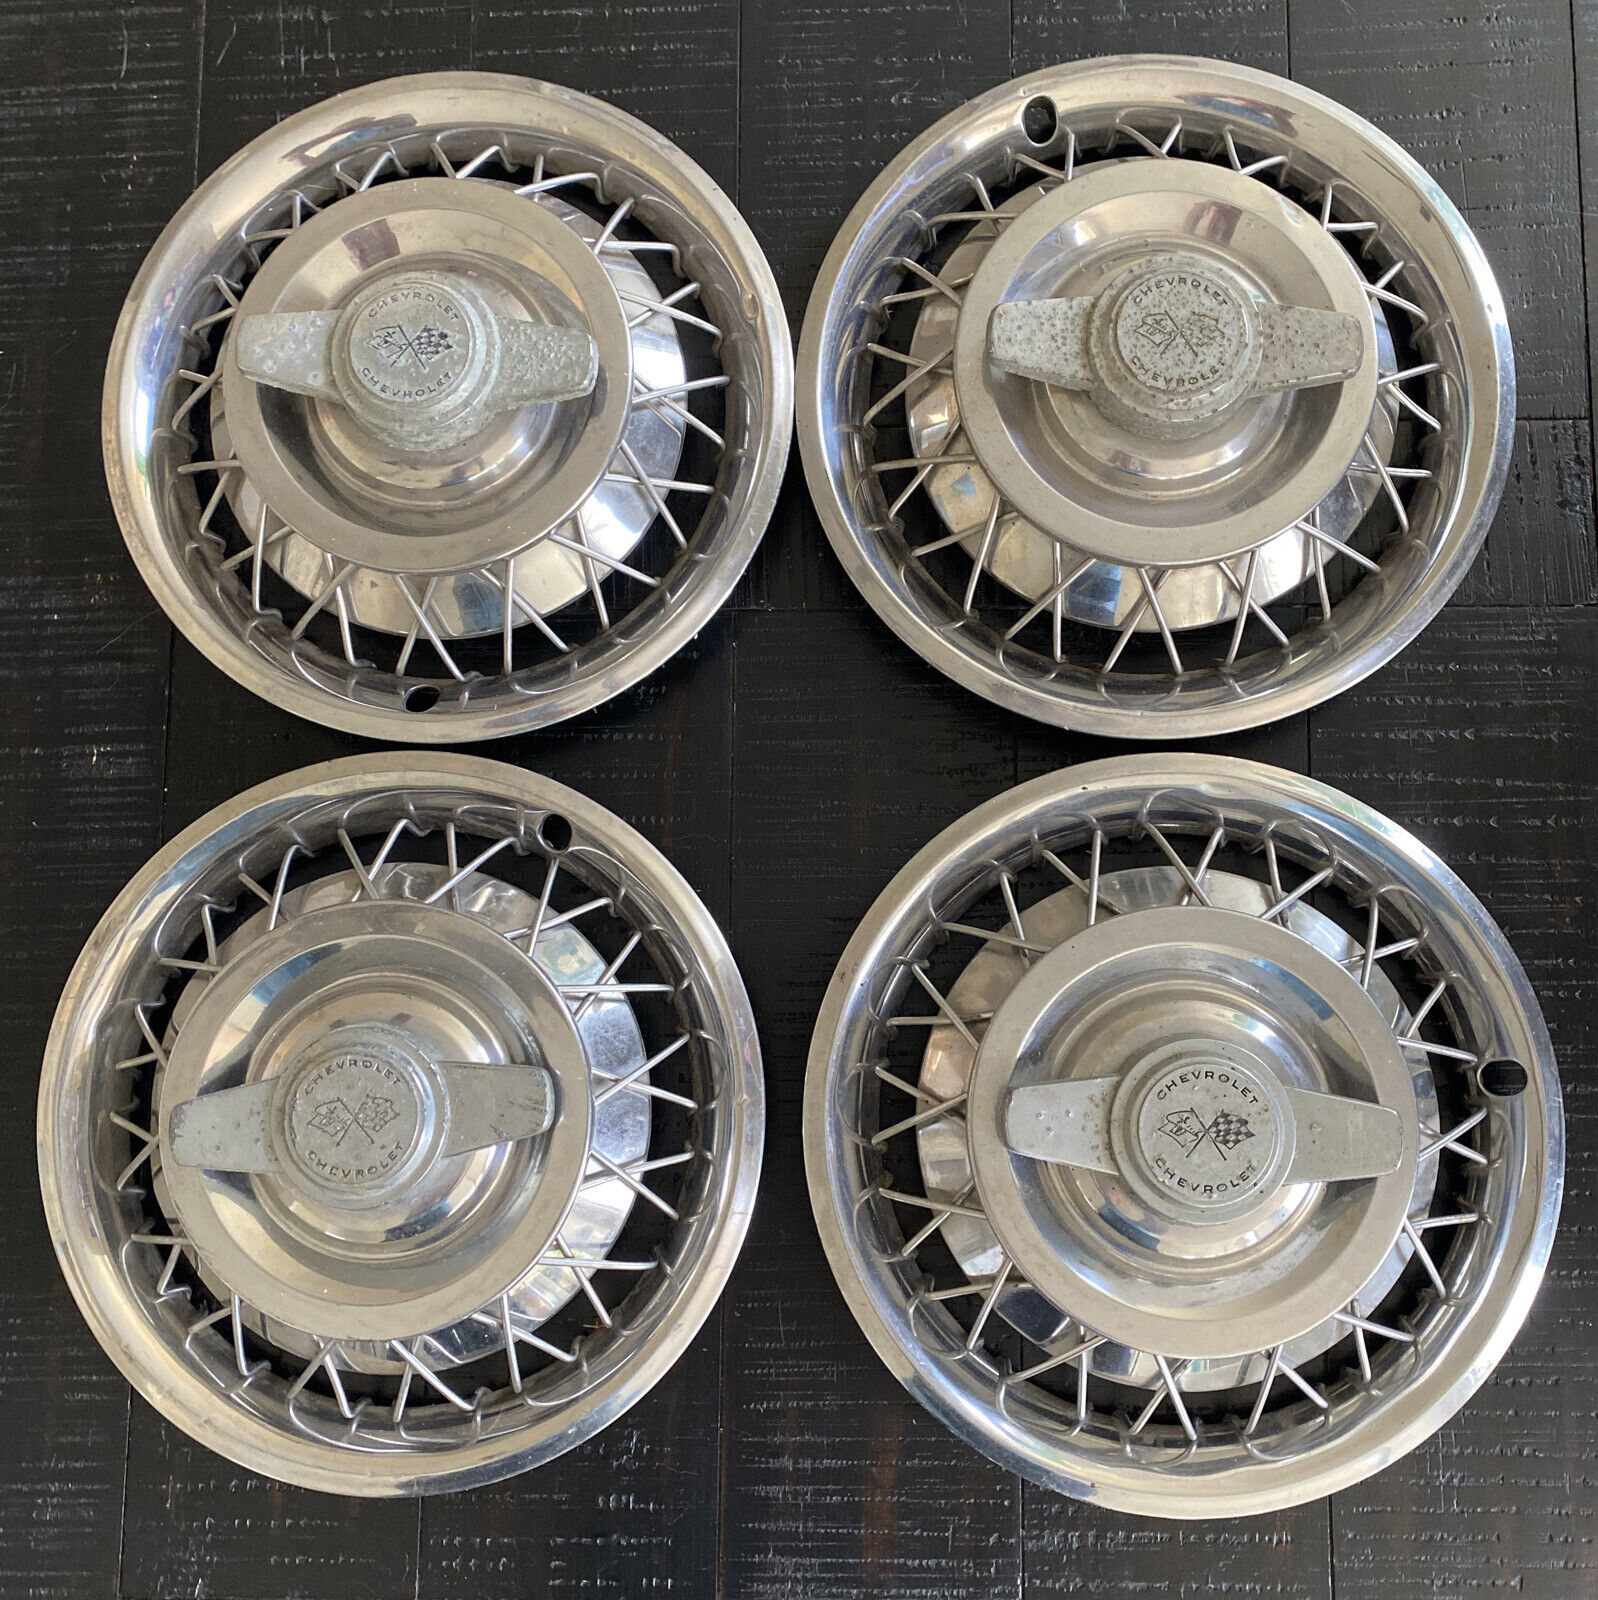 CHEVROLET CORVAIR 1964 1965 1966 14” HUBCAPS WHEEL COVERS CHEVY II SET OF 4 VTG